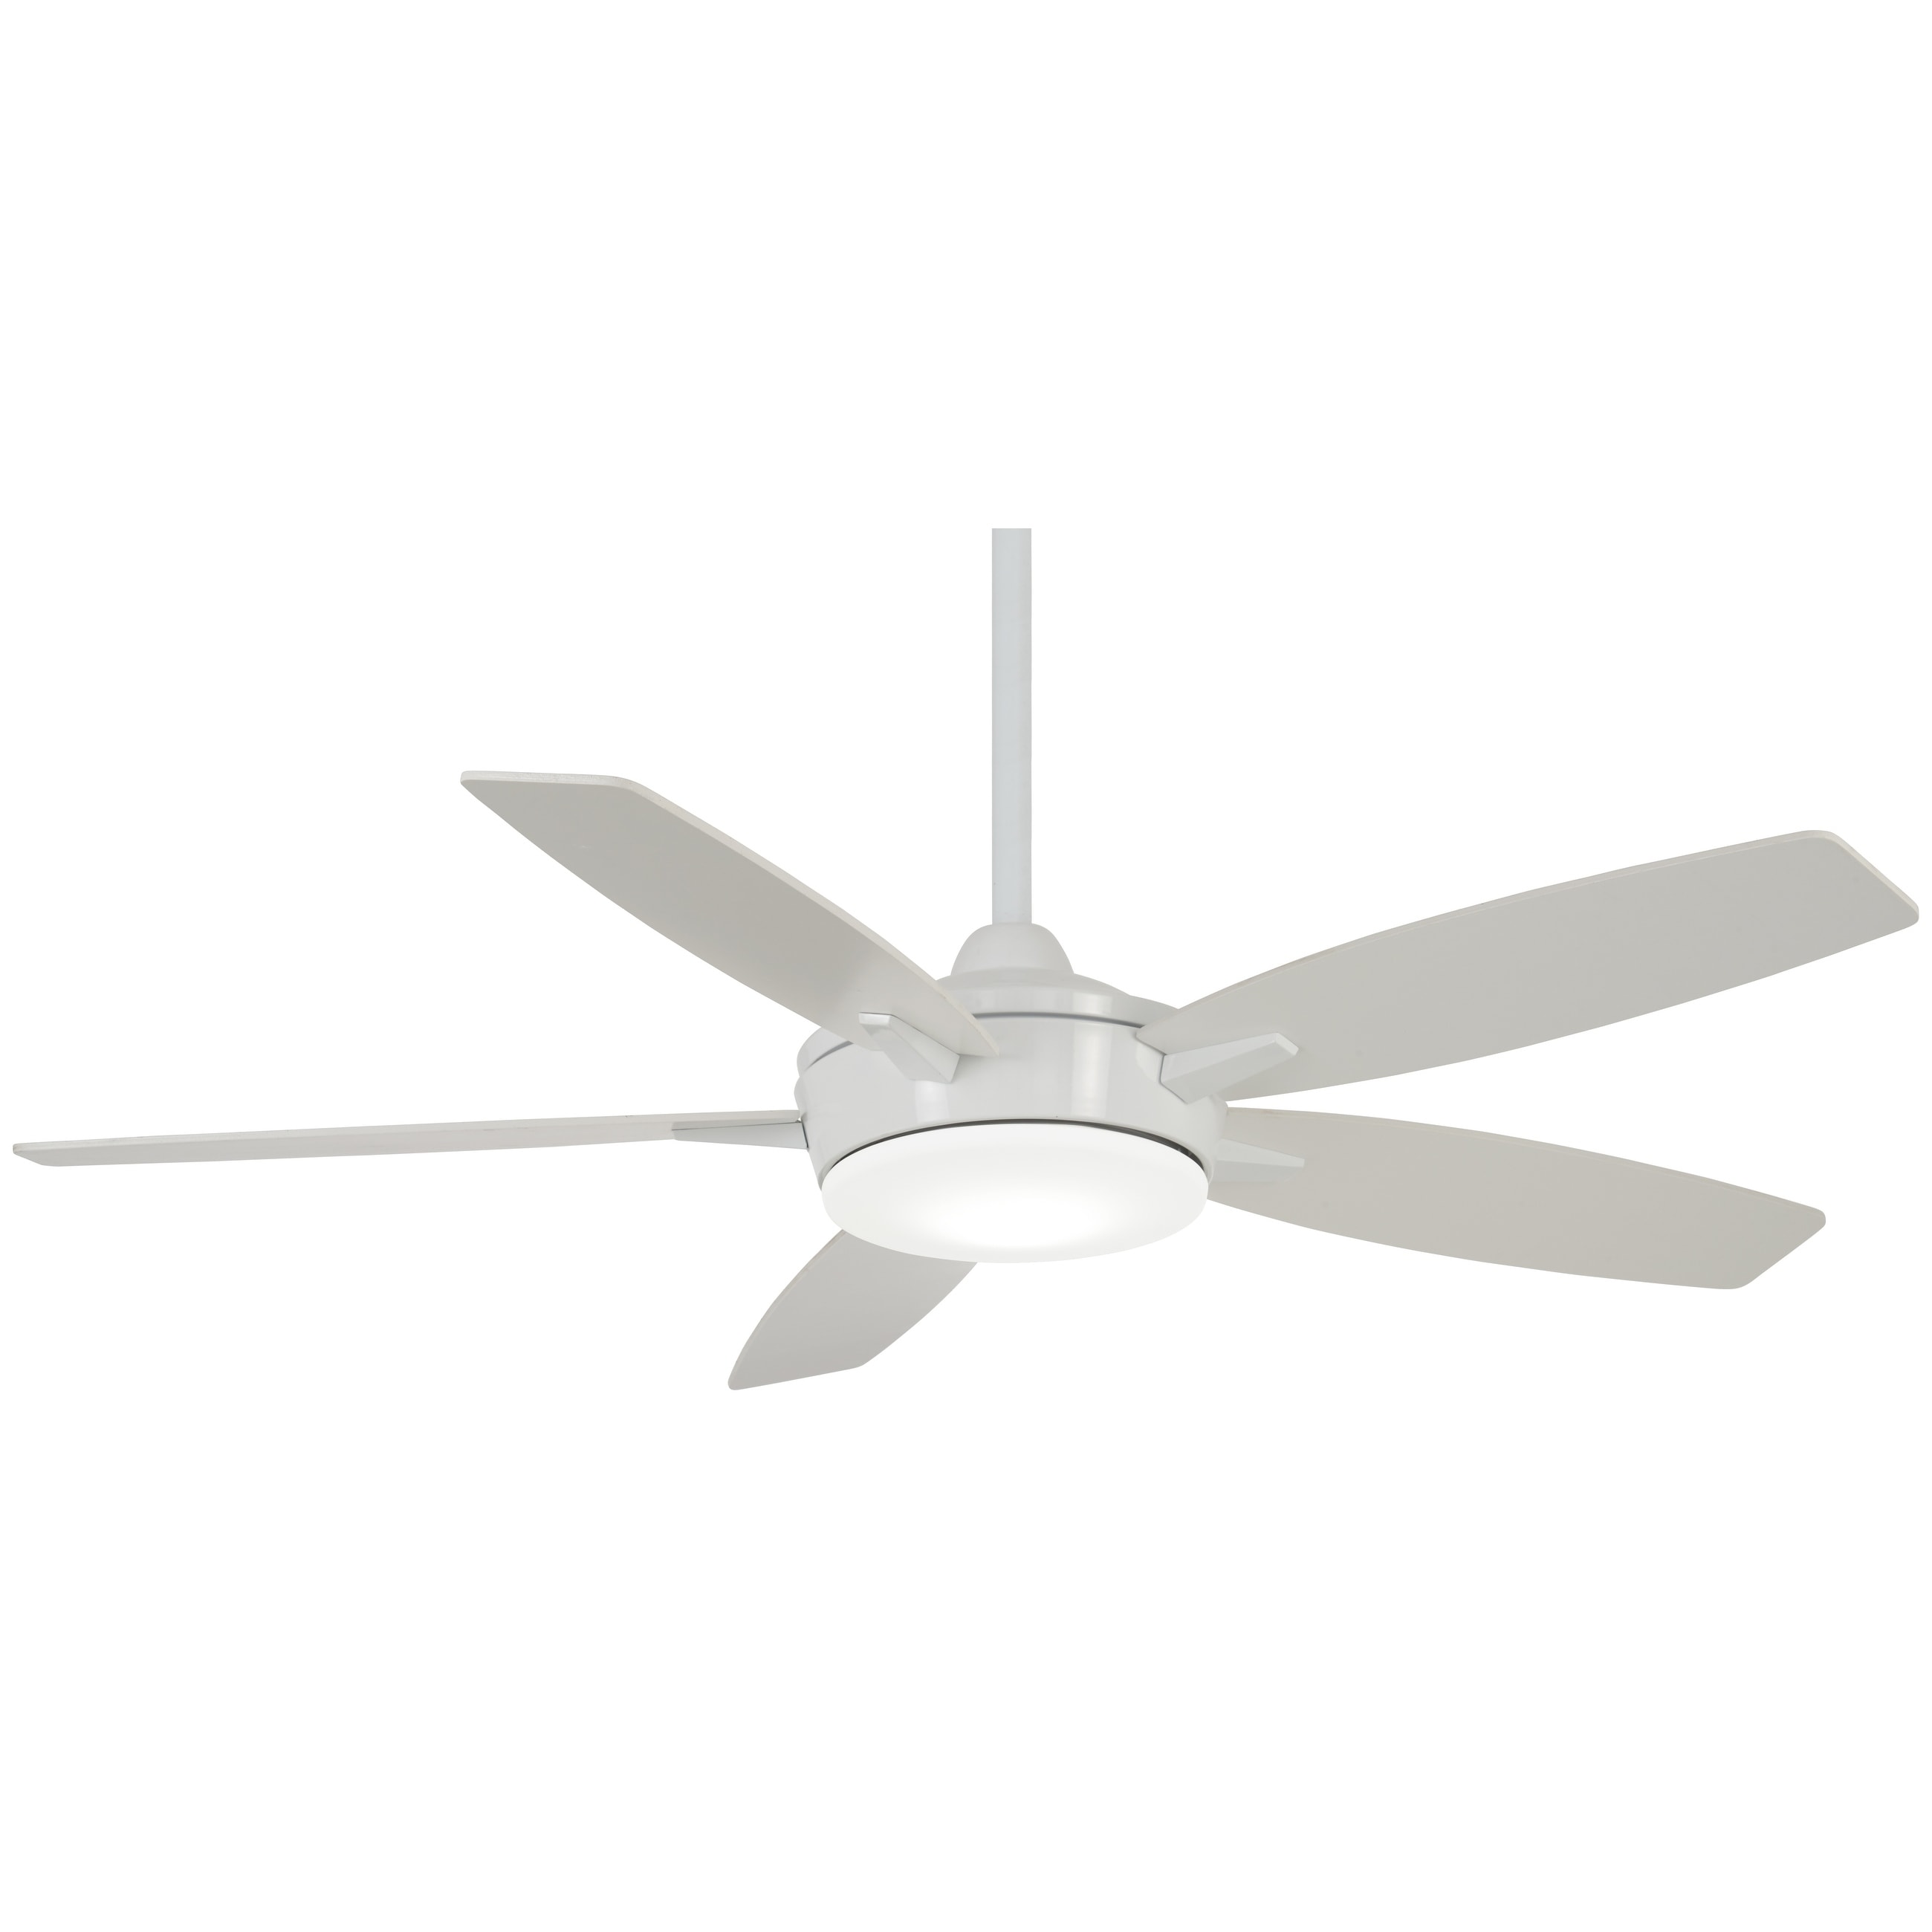 Shop Espace 52 Led Ceiling Fan In White Finish W White Blades By